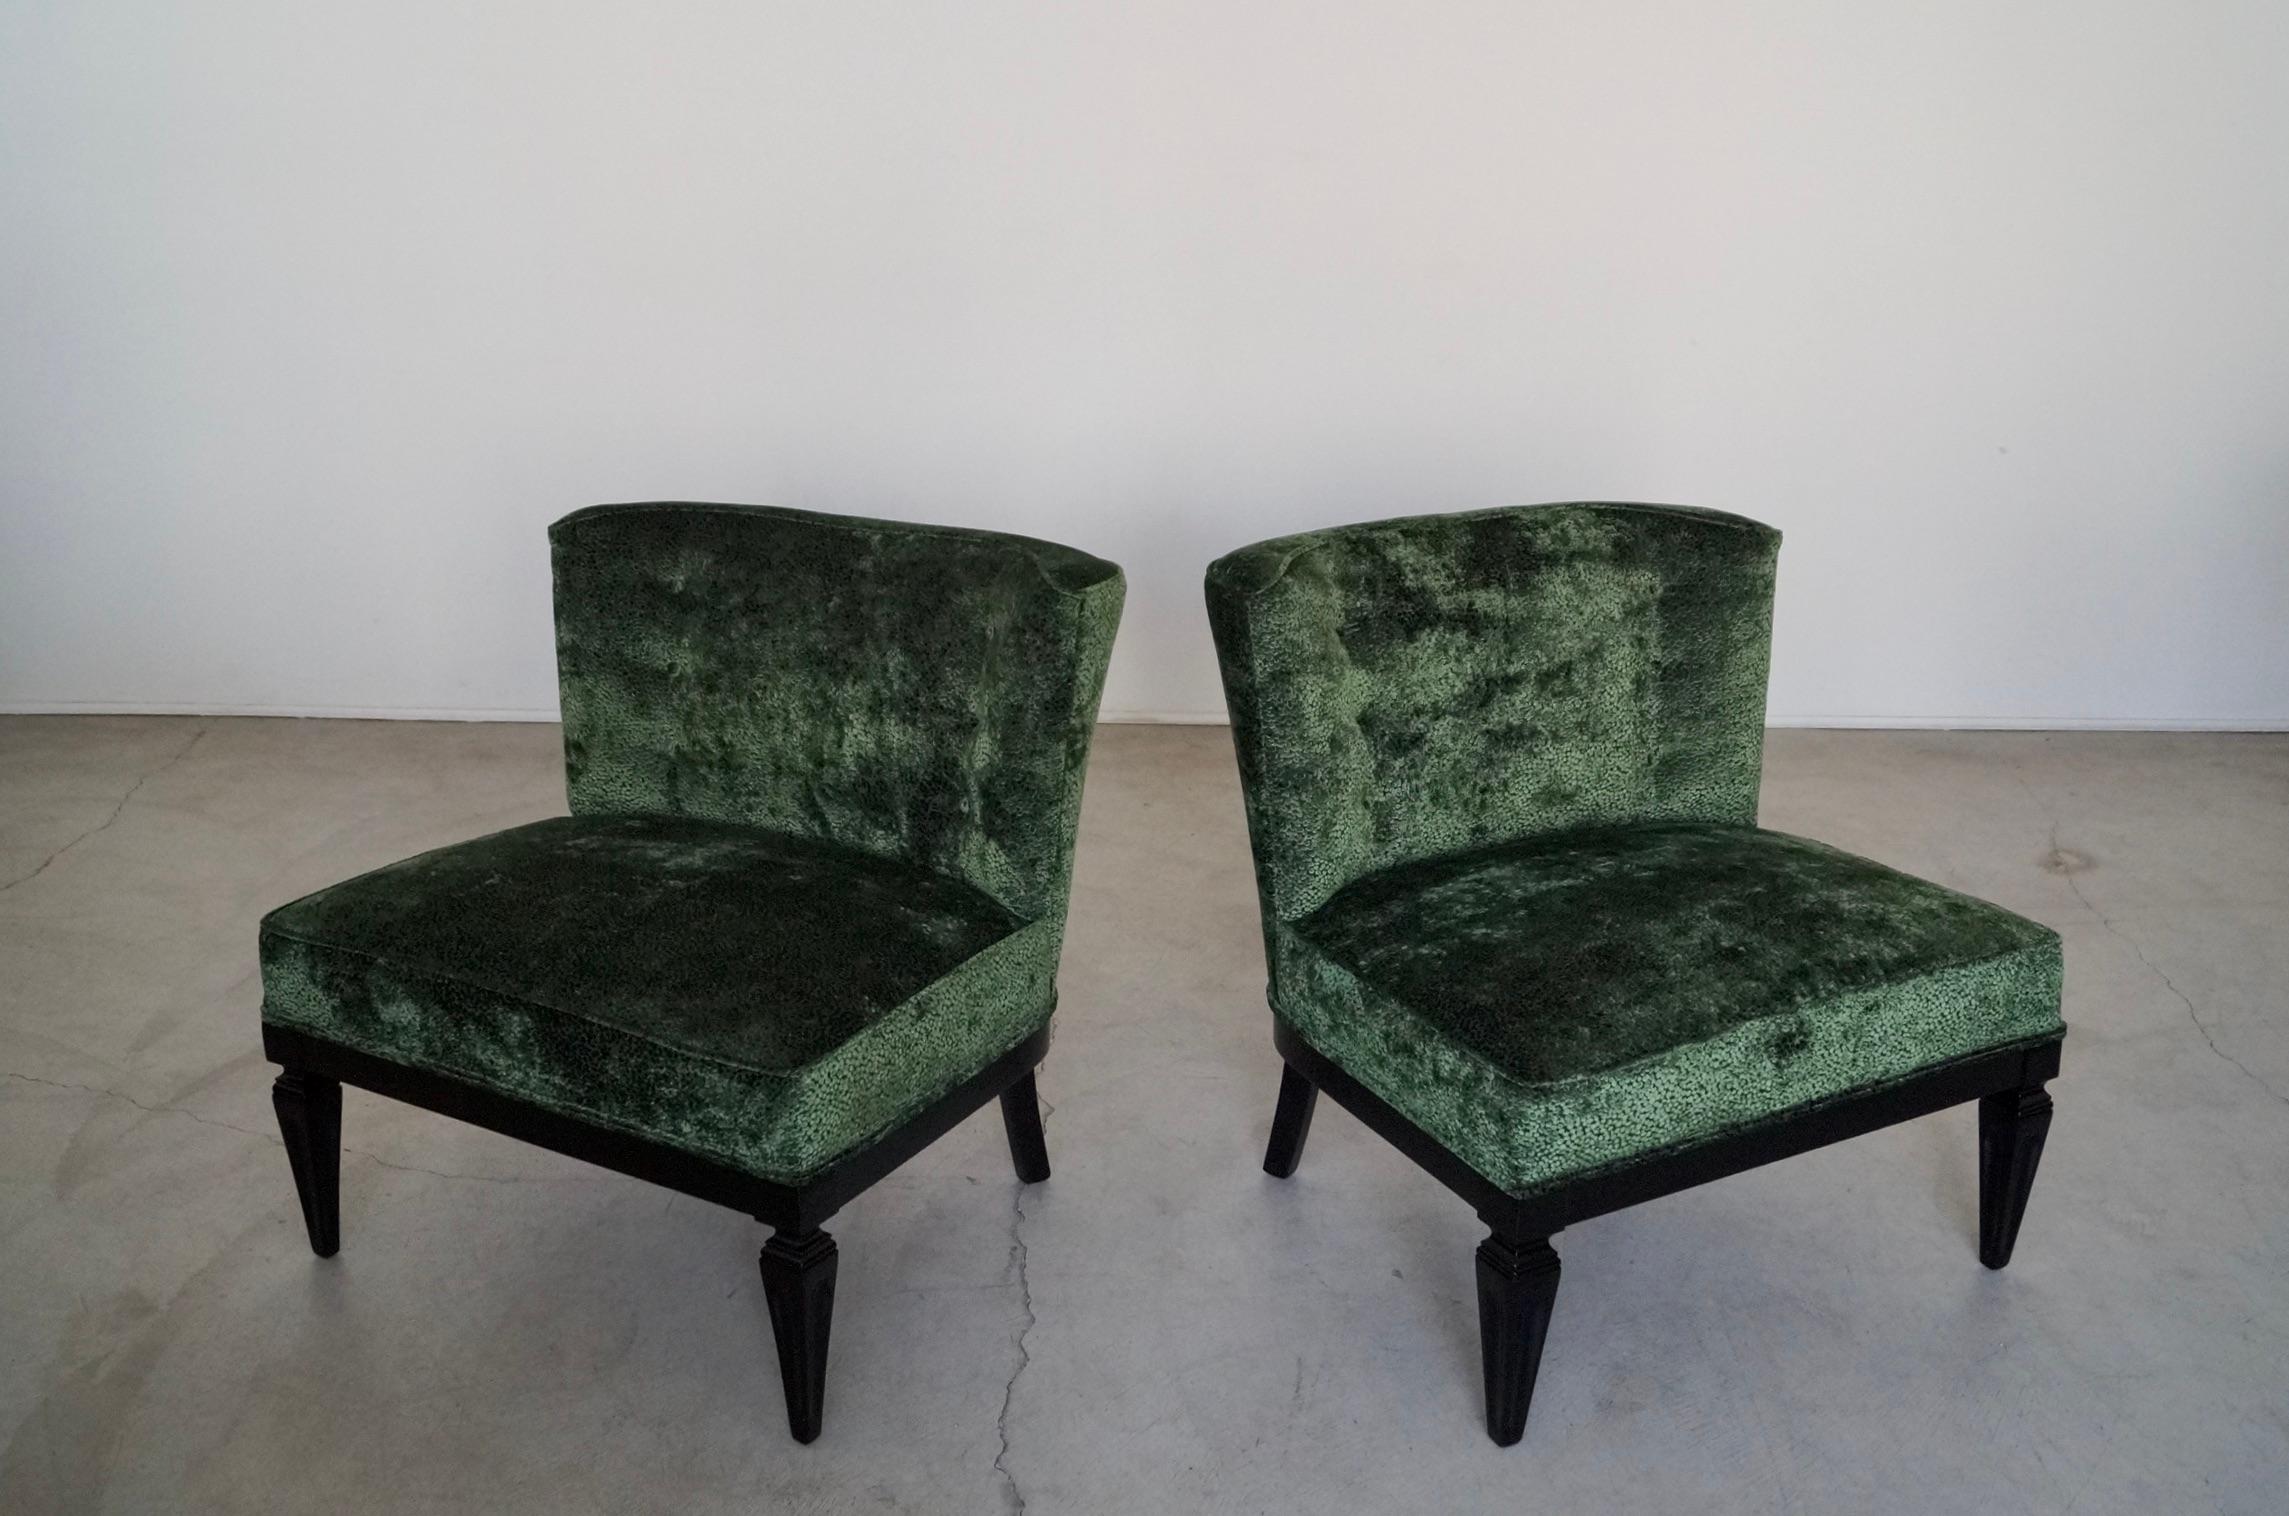 1960's Hollywood Regency Velvet Slipper Lounge Chairs - a Pair In Excellent Condition For Sale In Burbank, CA